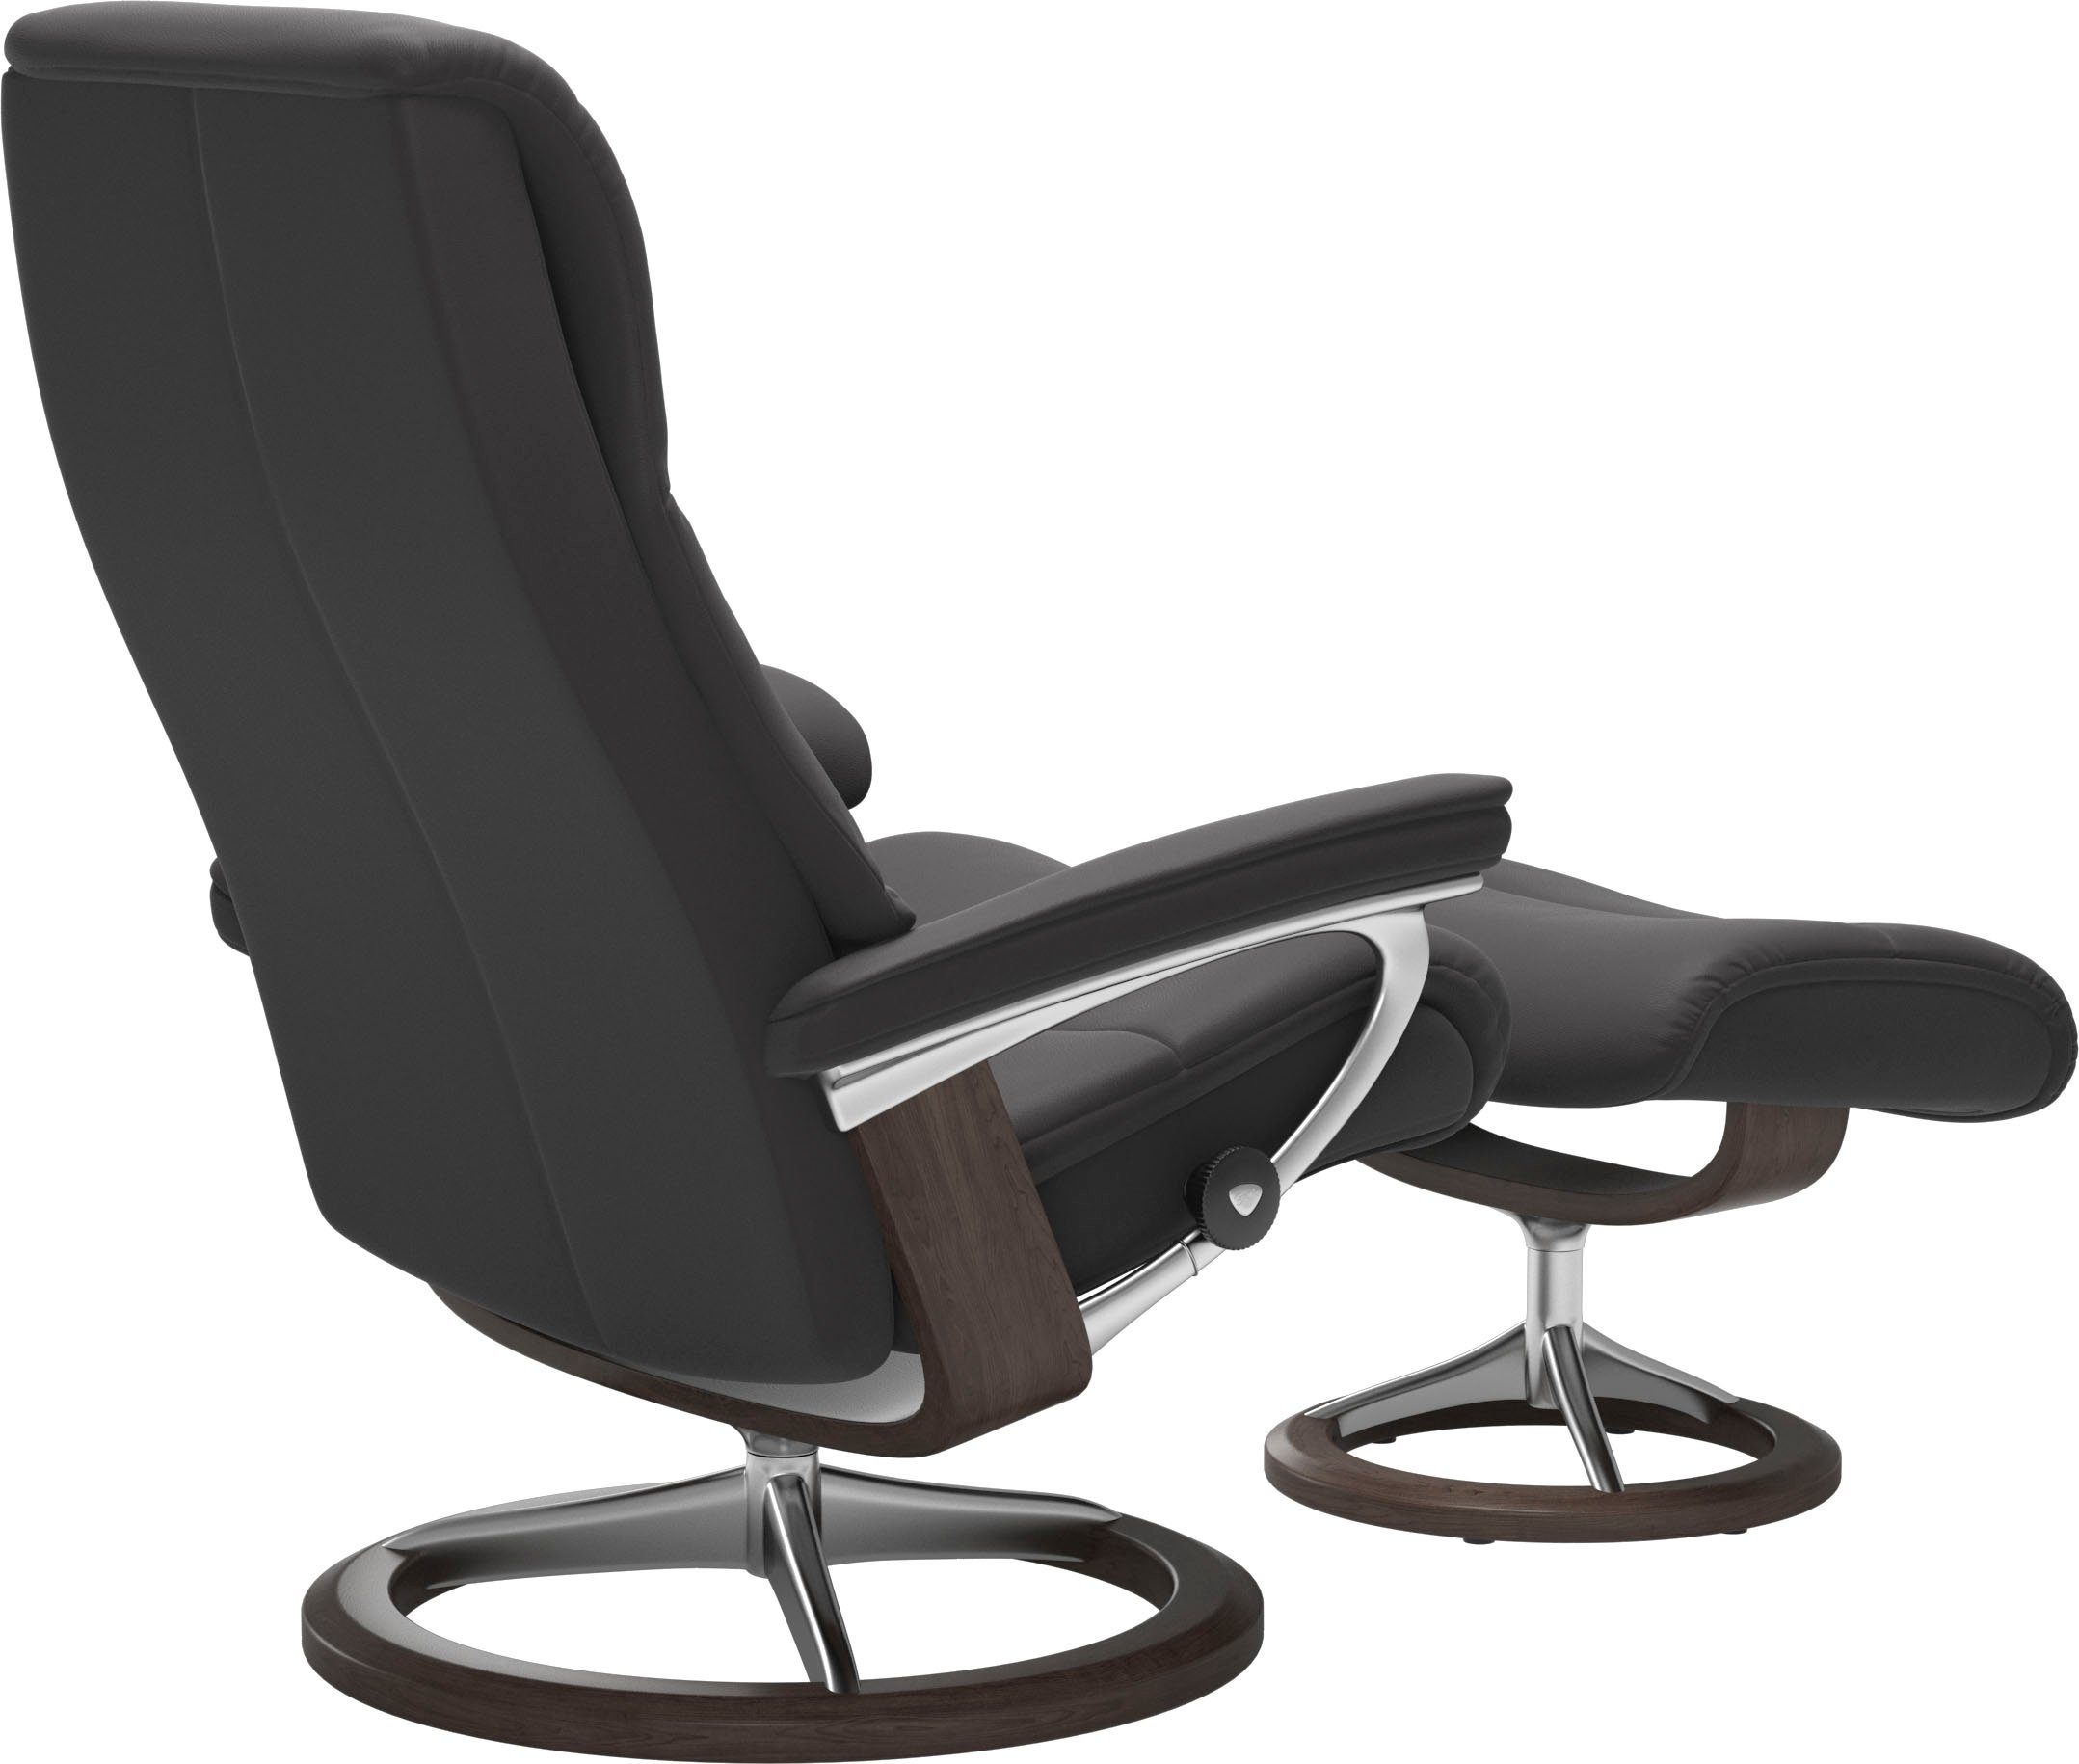 Stressless® Relaxsessel Base, Größe Signature mit Wenge View, S,Gestell